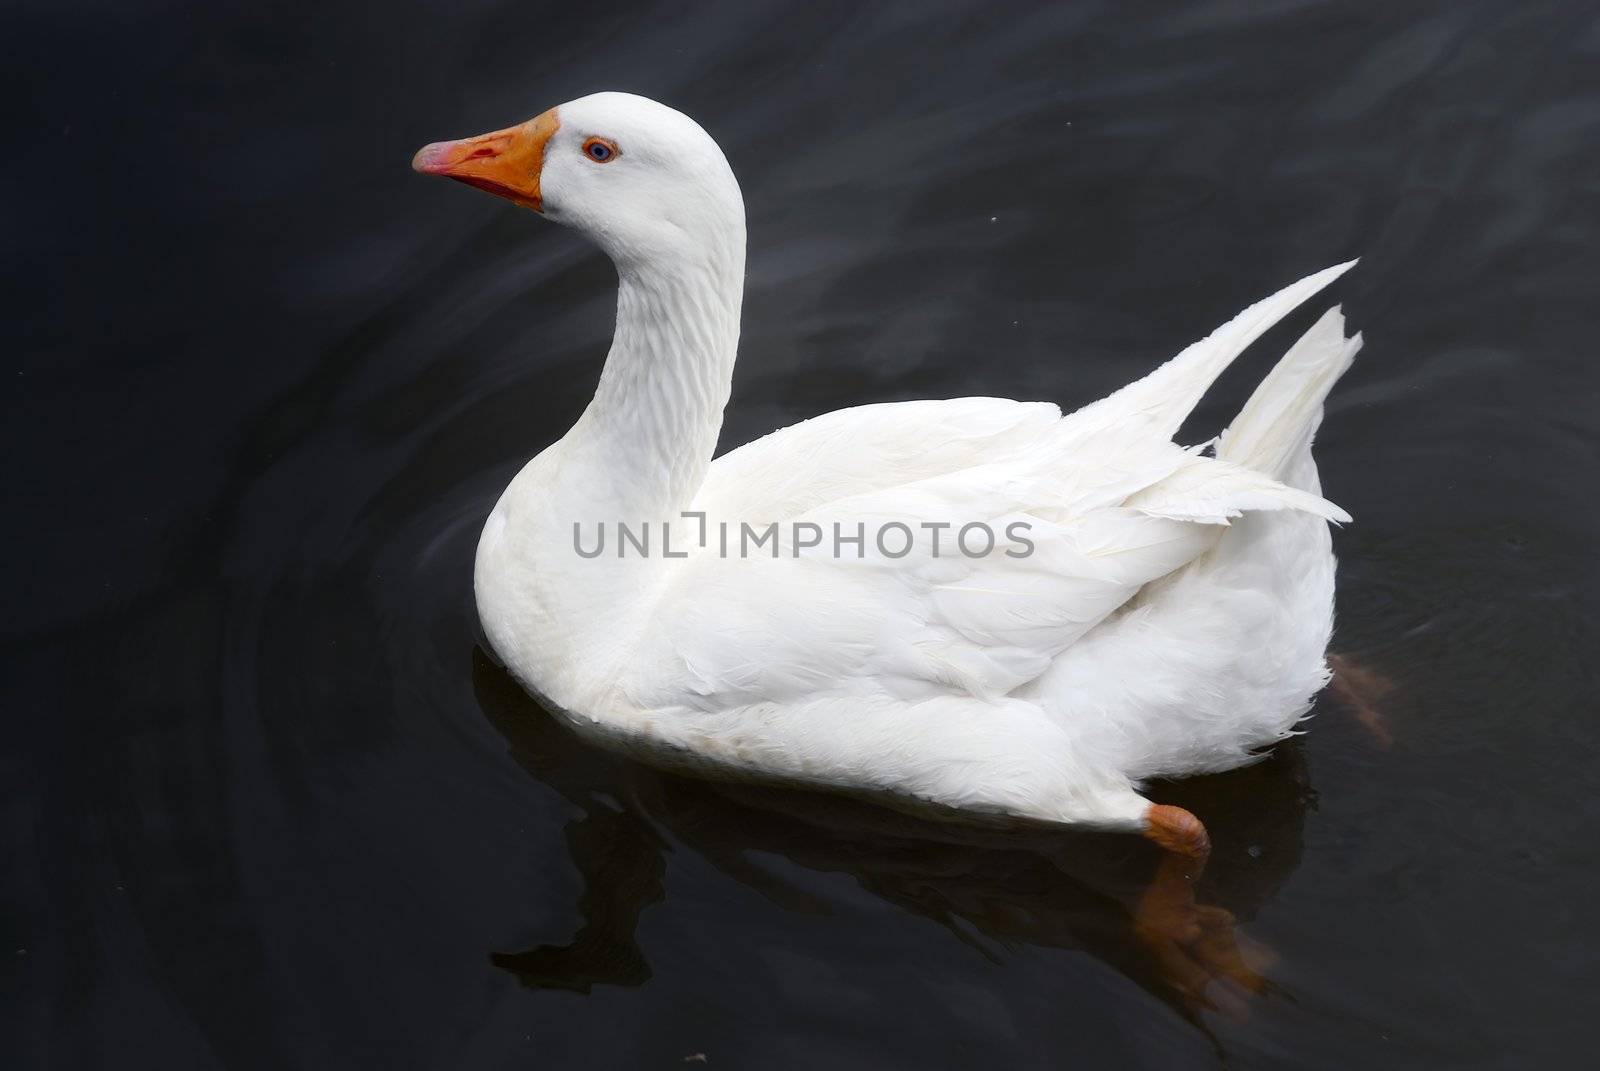 A white duck peacefully swimming in water